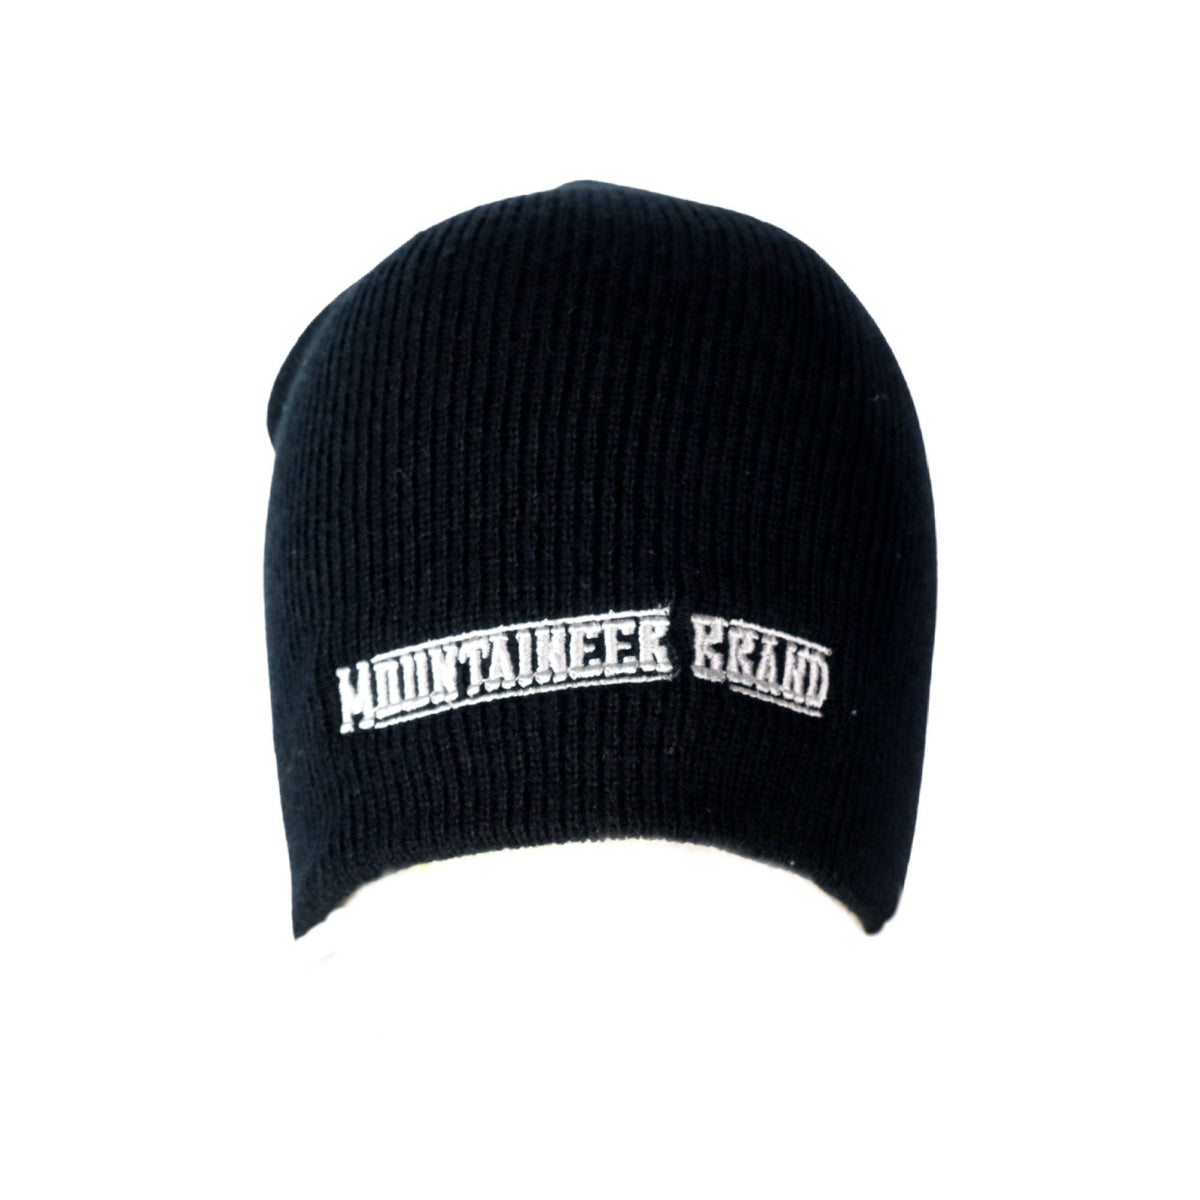 Mountaineer Brand Beanie Knit Hat – Mountaineer Brand Products